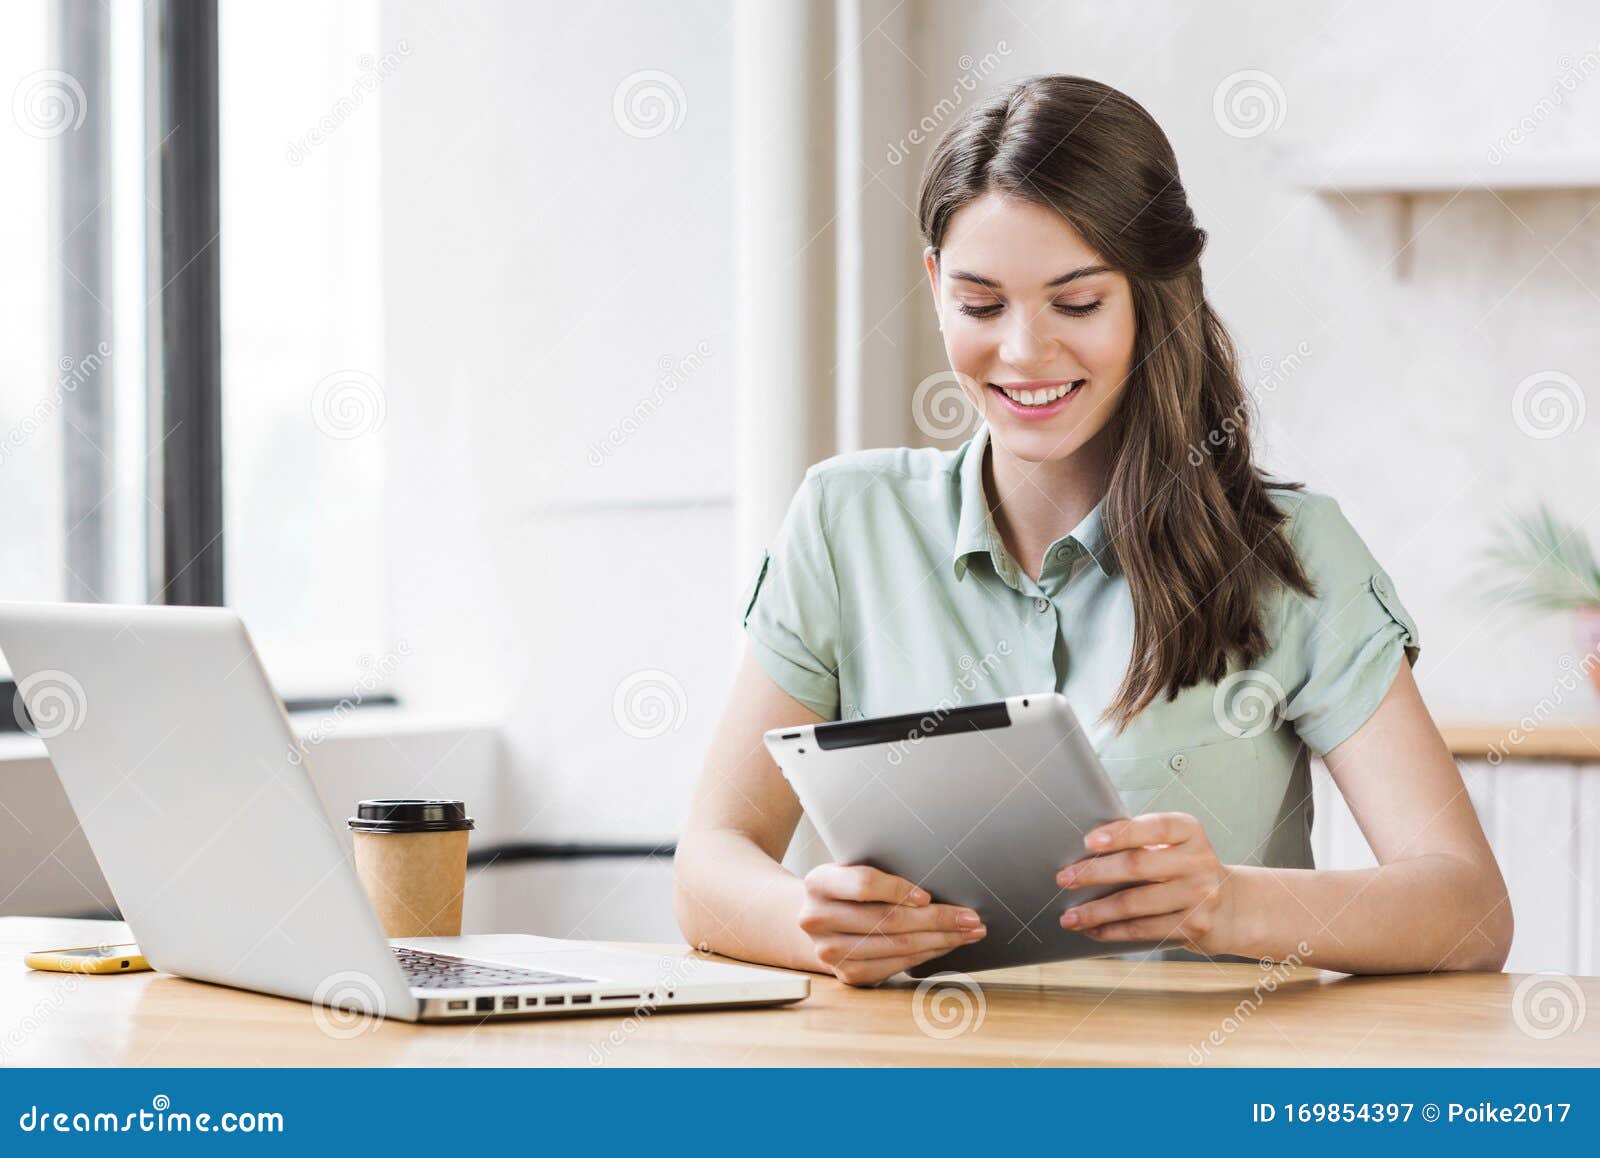 woman using laptop and digital tablet in office. entrepreneur, businesswoman, freelance worker, student working on computer.